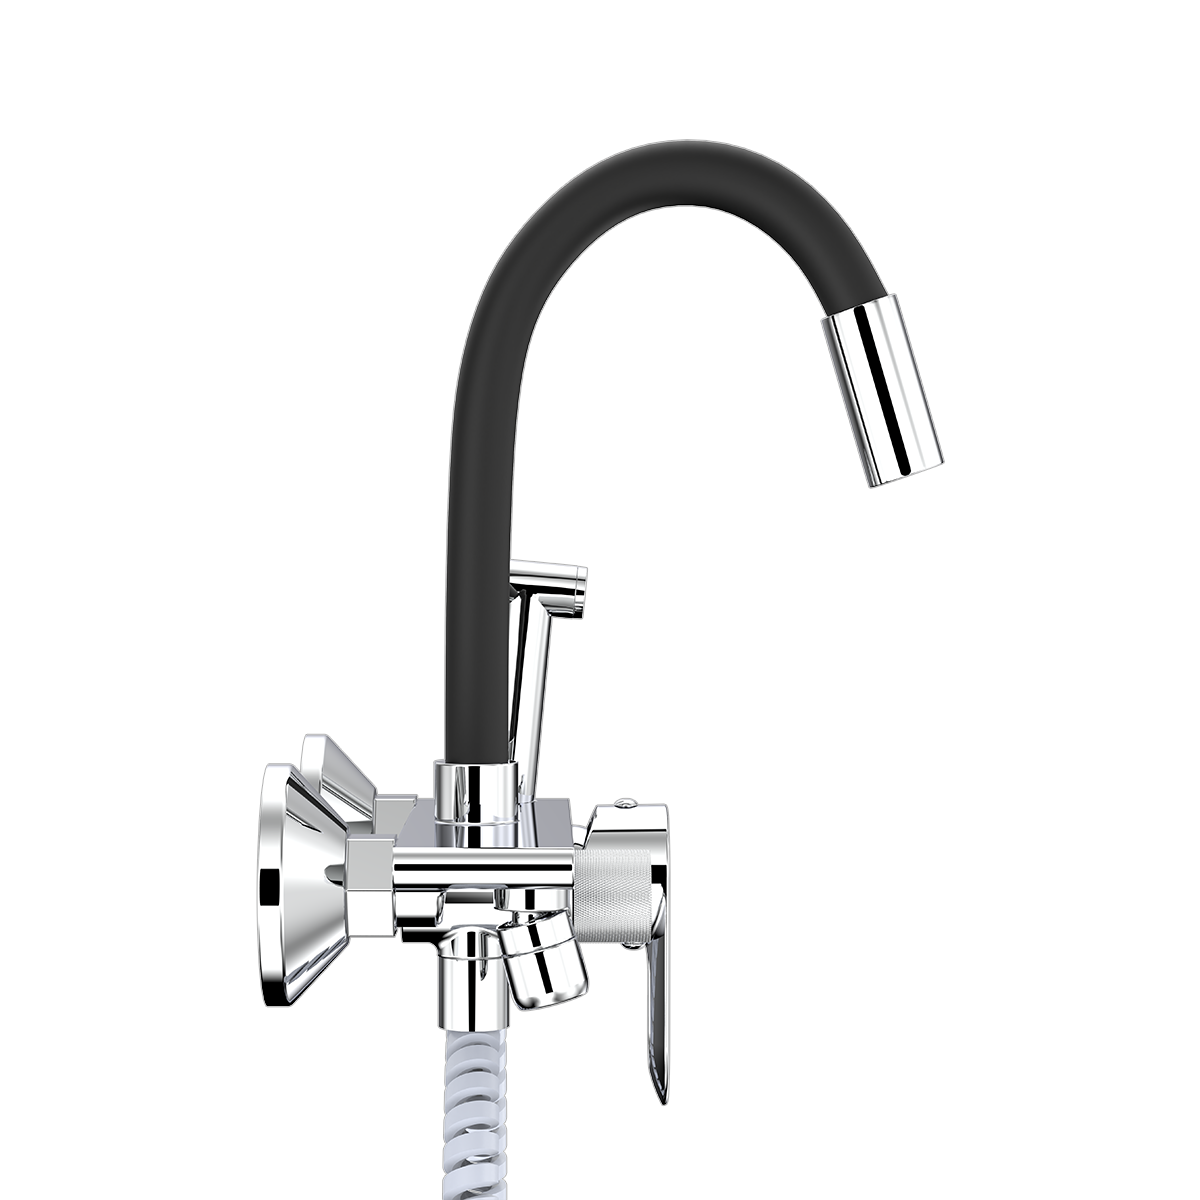 Wall Mounted Sink Mixer With Swivel Flexible Spout & Hand Shower